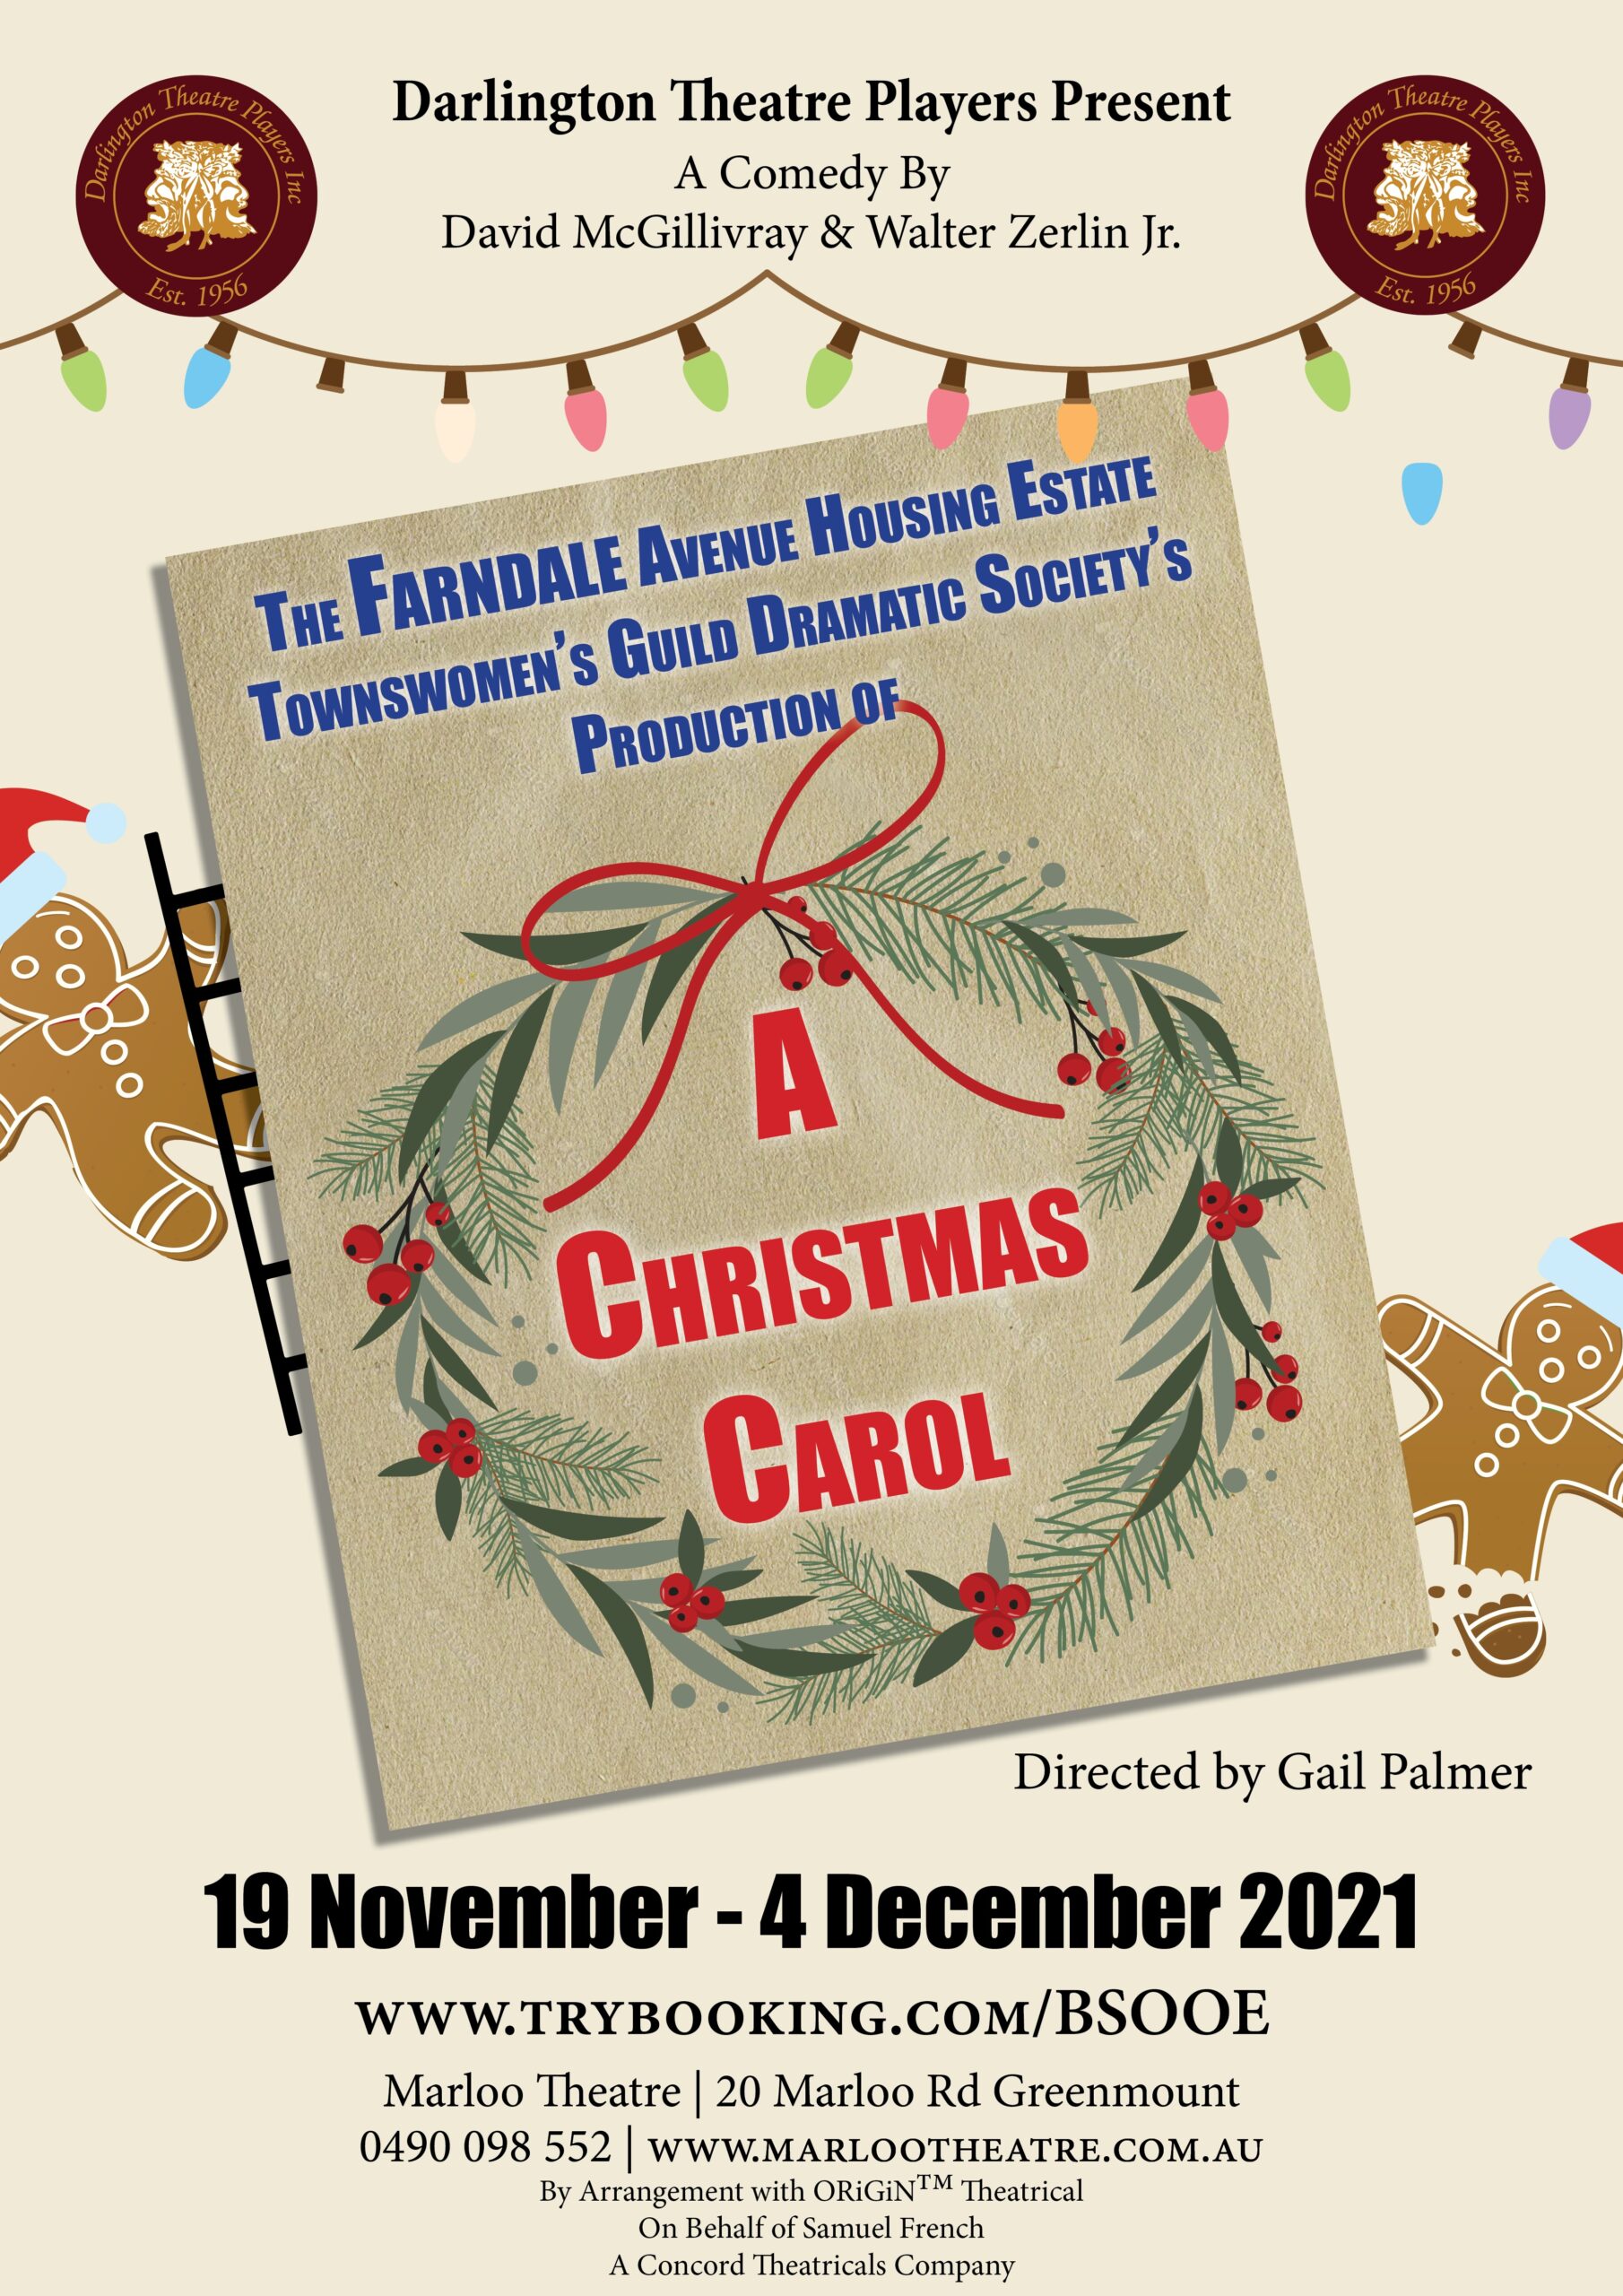 The Ferndale Avenue Housing Estate Townswomen’s Guild Dramatic Society’s Production of A Christmas Carol